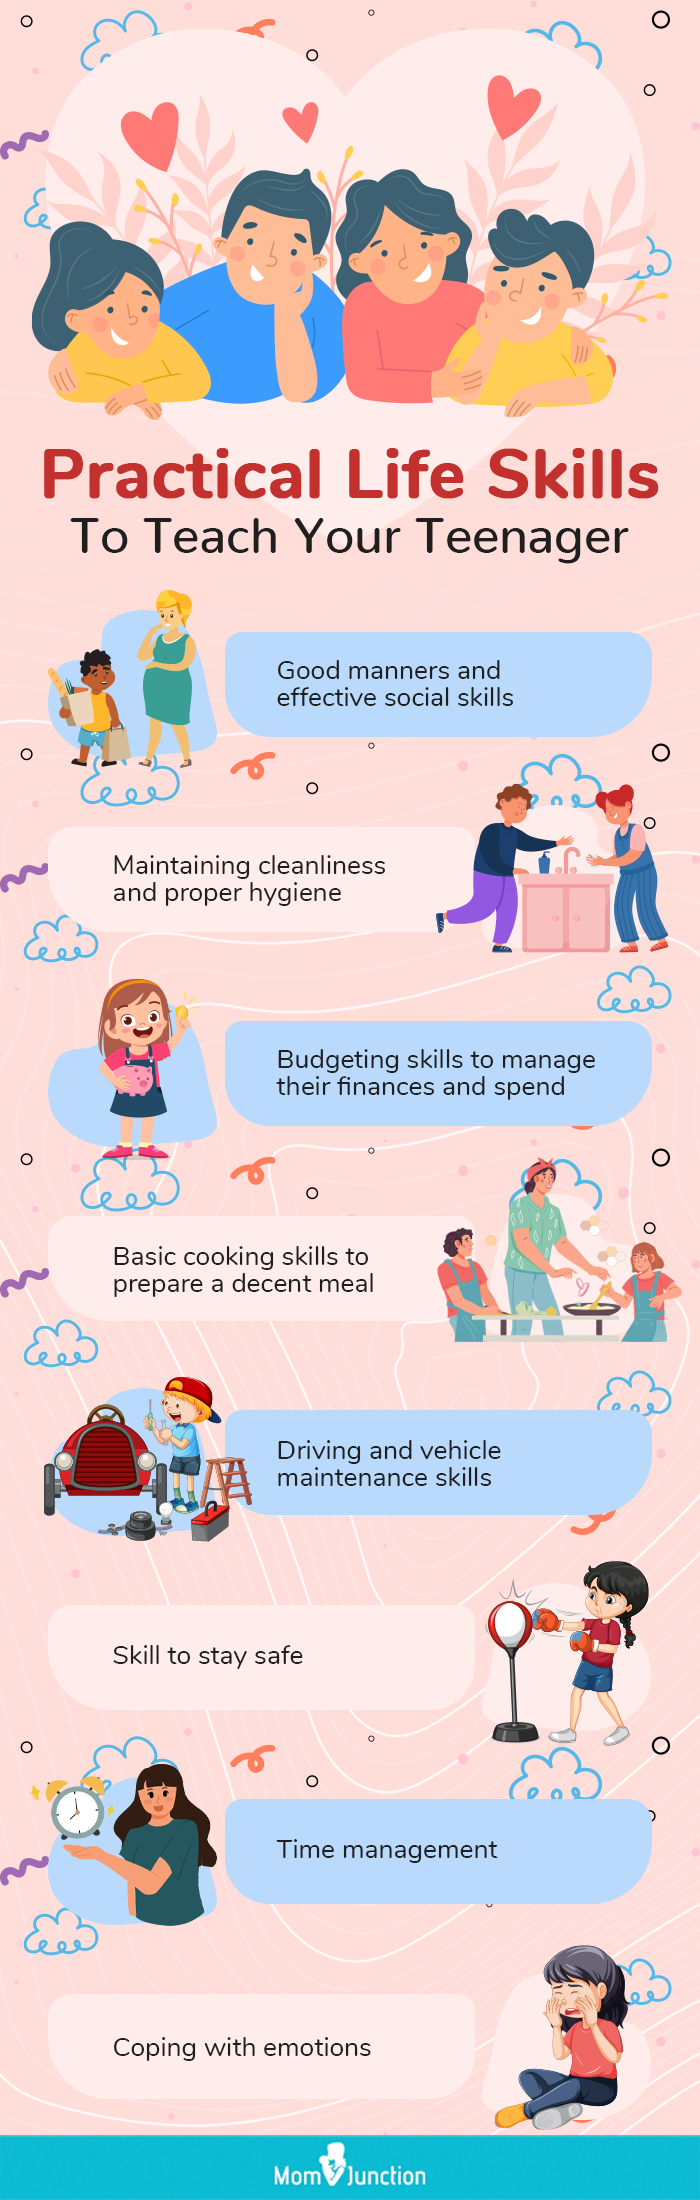 life skills to teach your teenager [infographic]